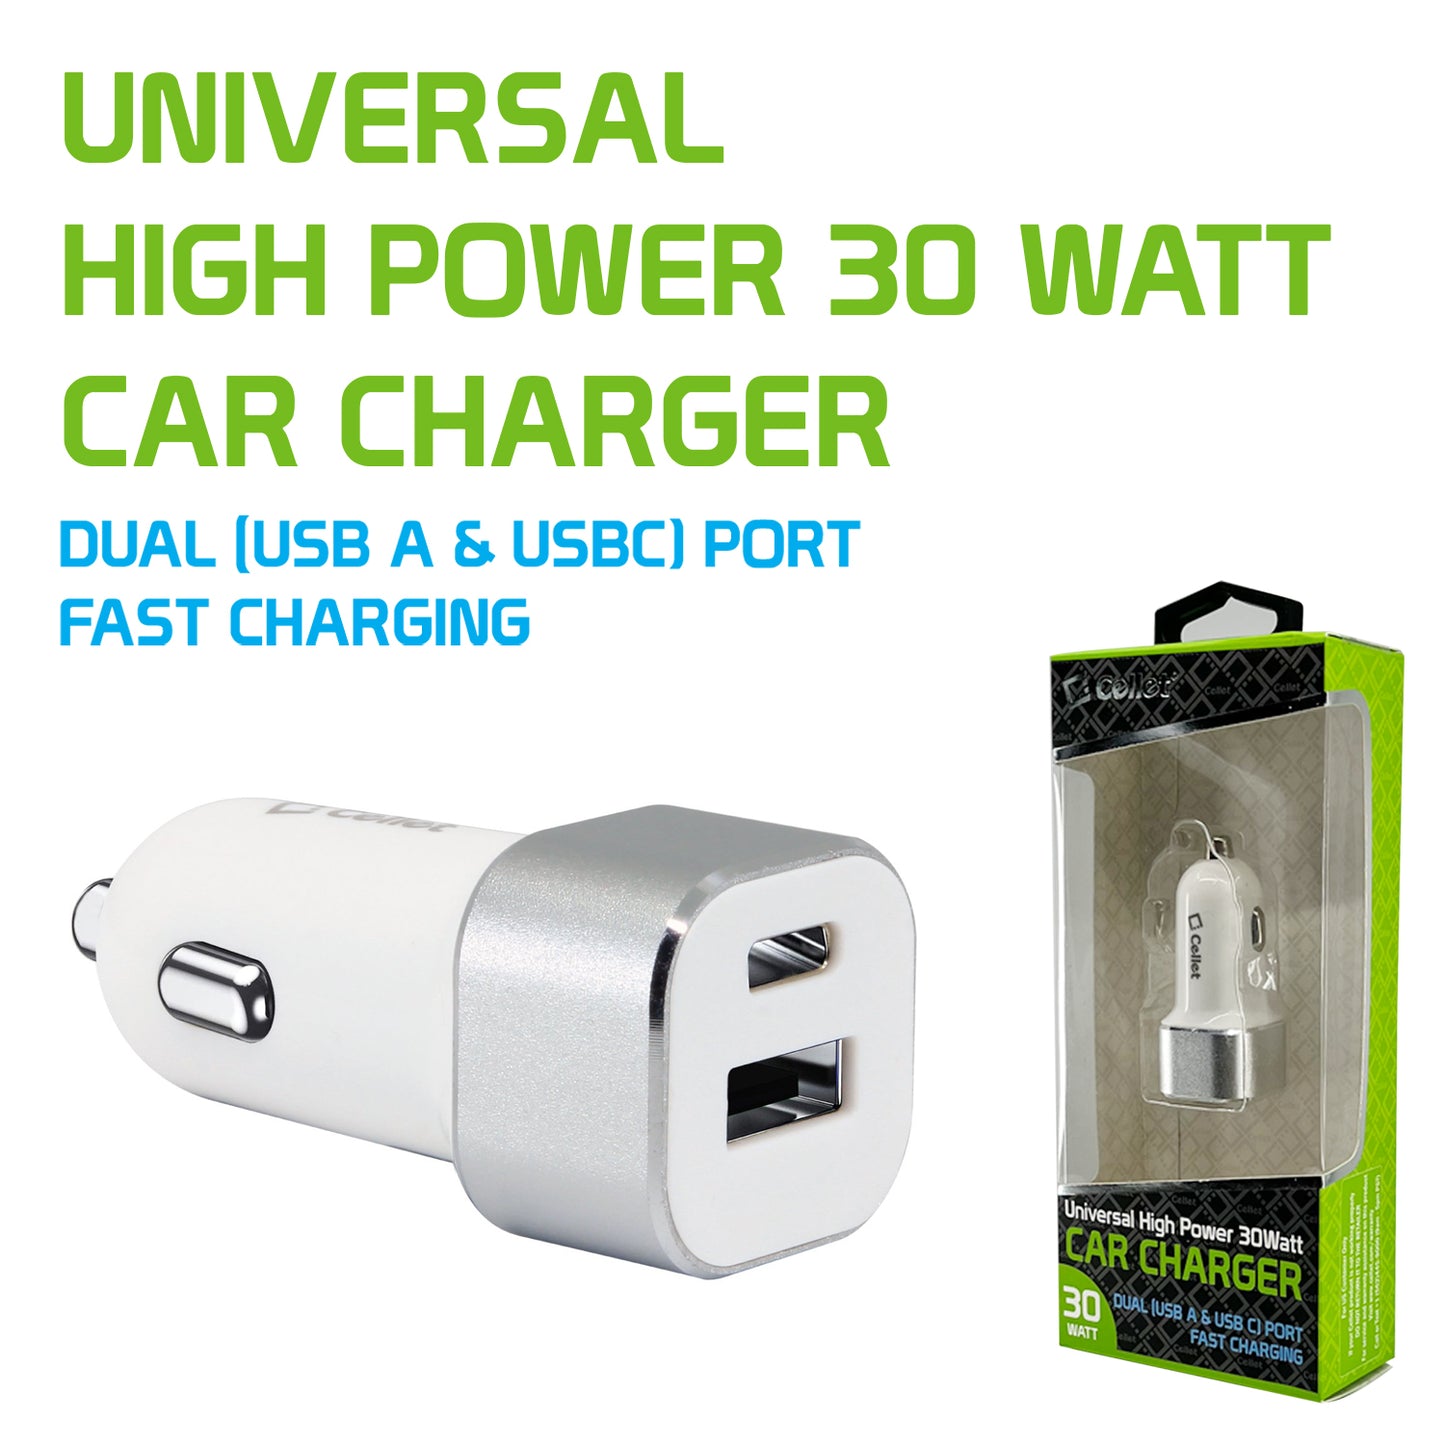 PC30WWT -  Dual USB Car Charger, Universal High Power 30 Watt Dual (USB A & USB C) Port Car Charger by Cellet - White